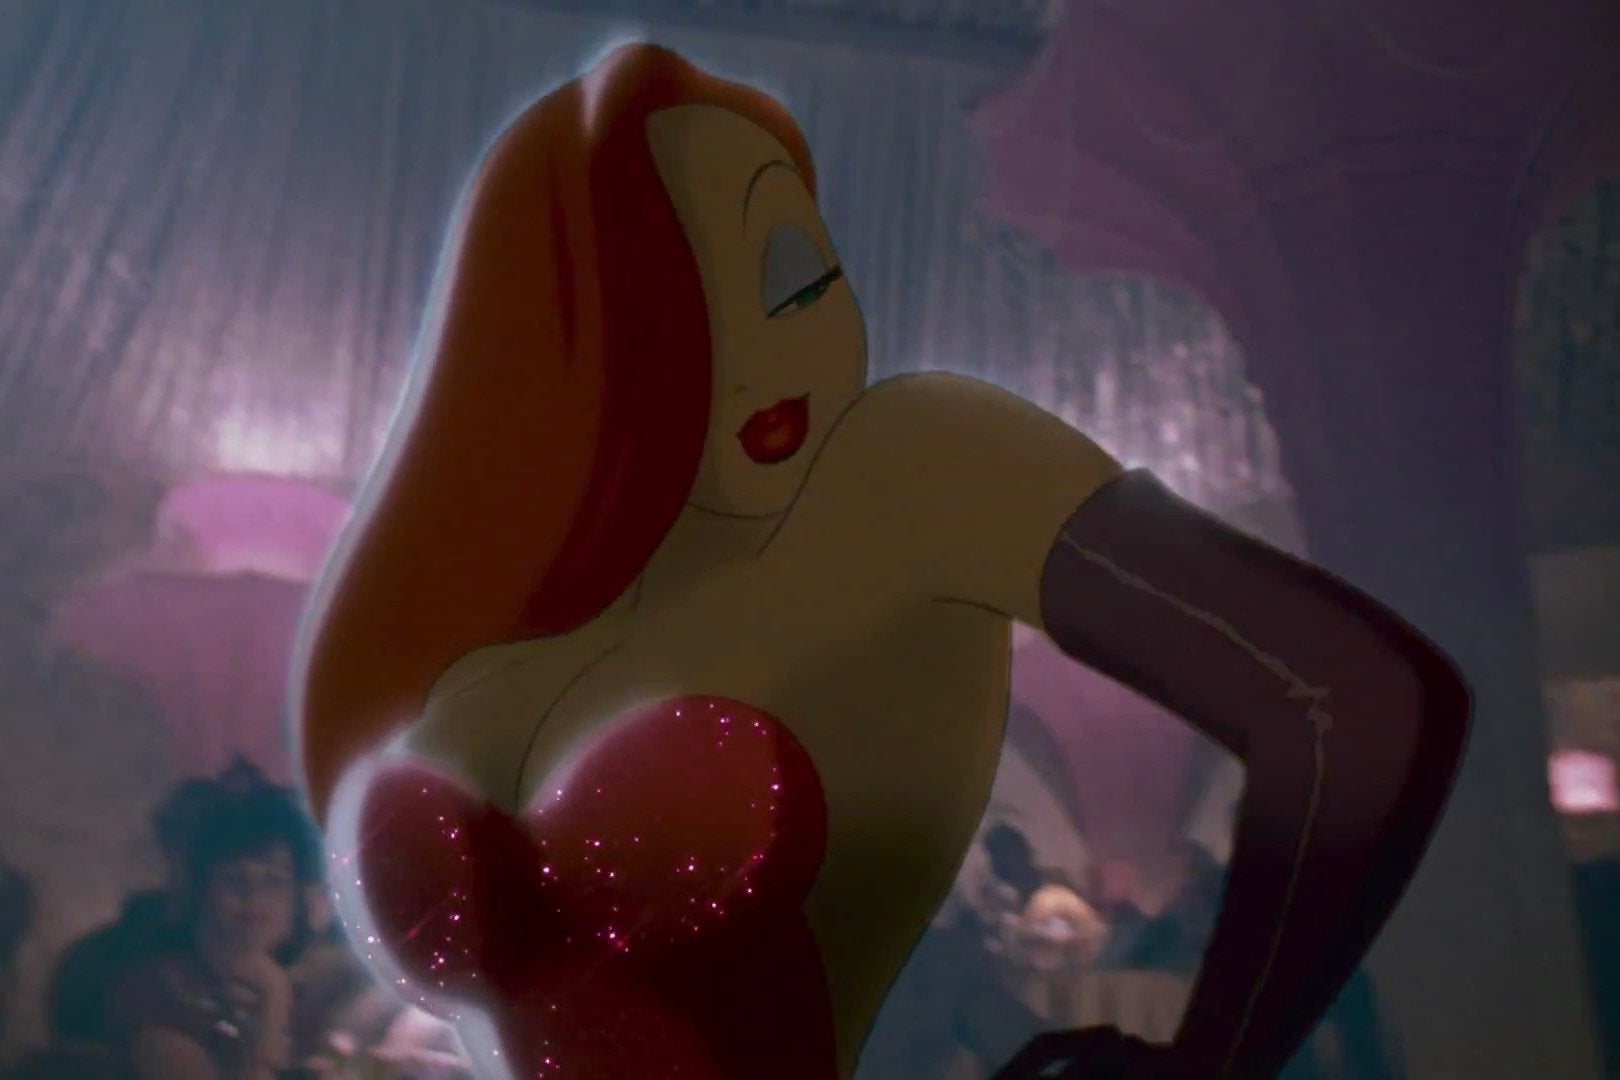 Jessica Rabbit: pure product of the male gaze